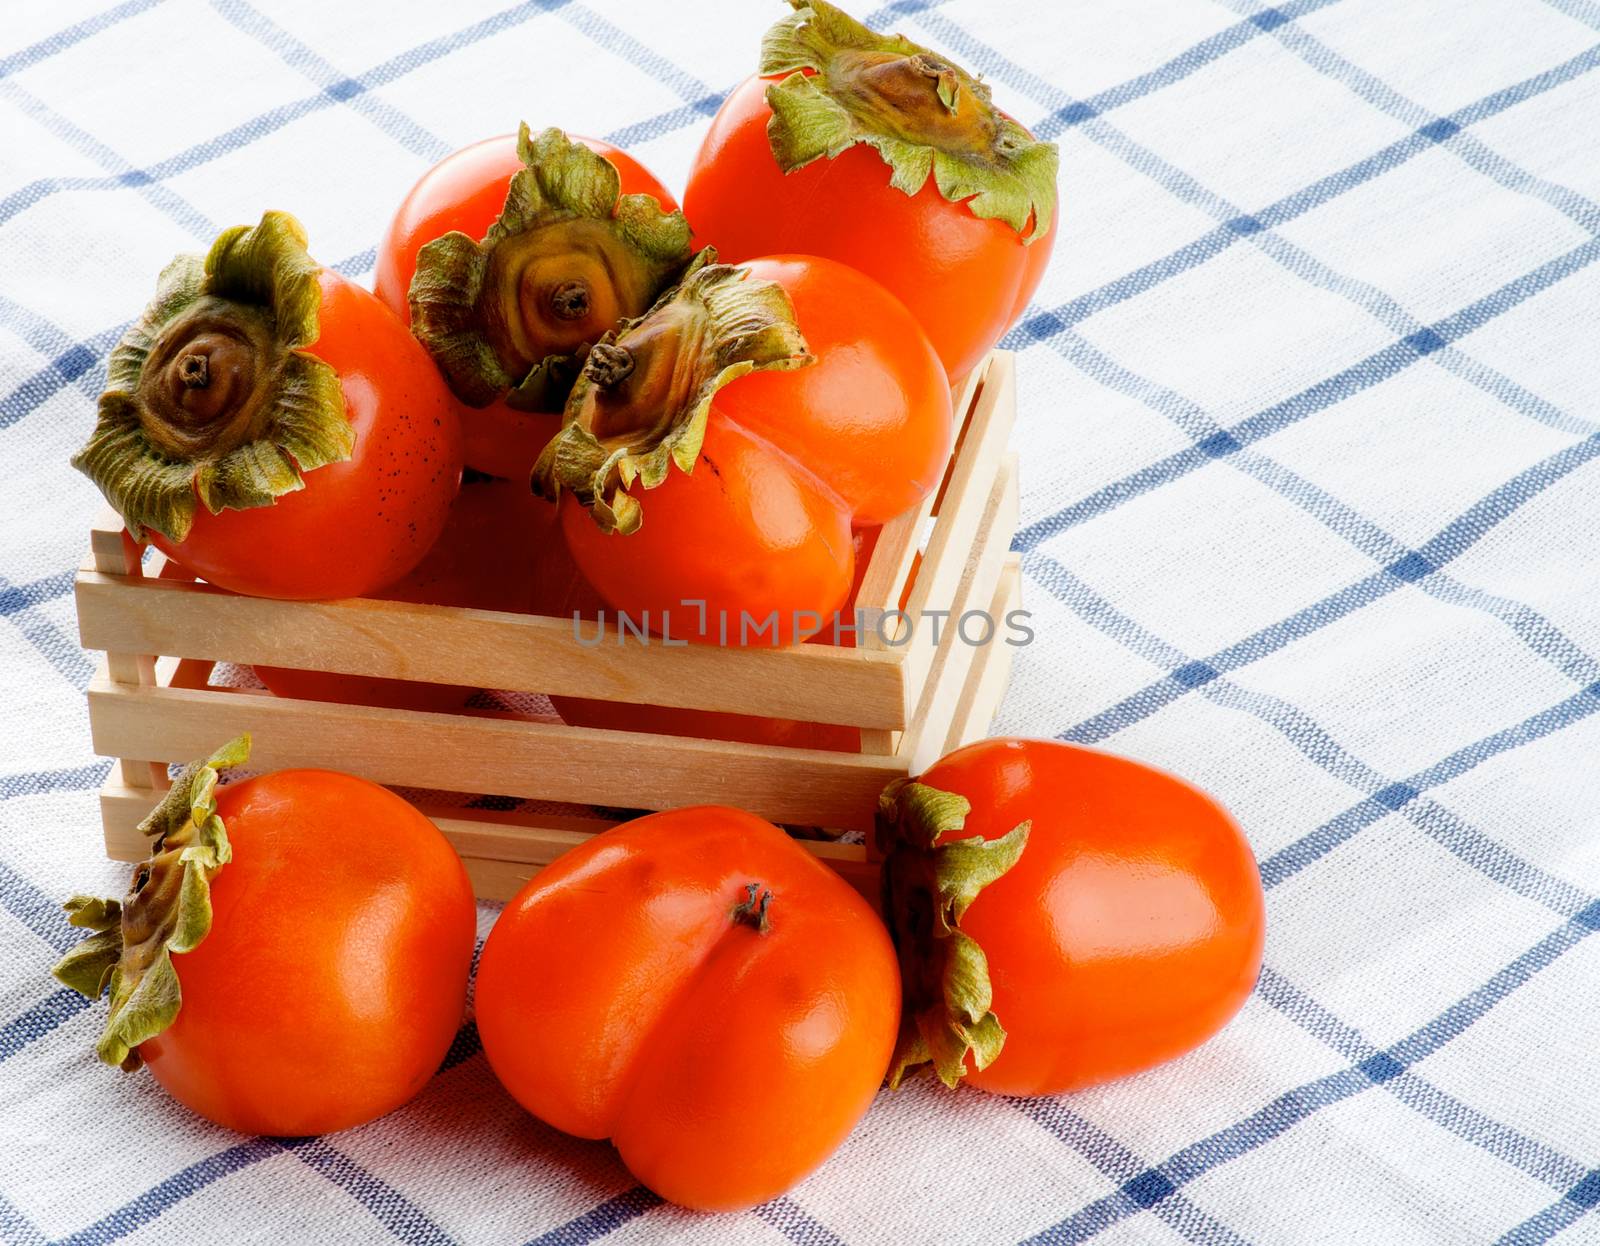 Arrangement of Delicious Raw Persimmon in Wooden Box closeup on Checkered Textile Napkin